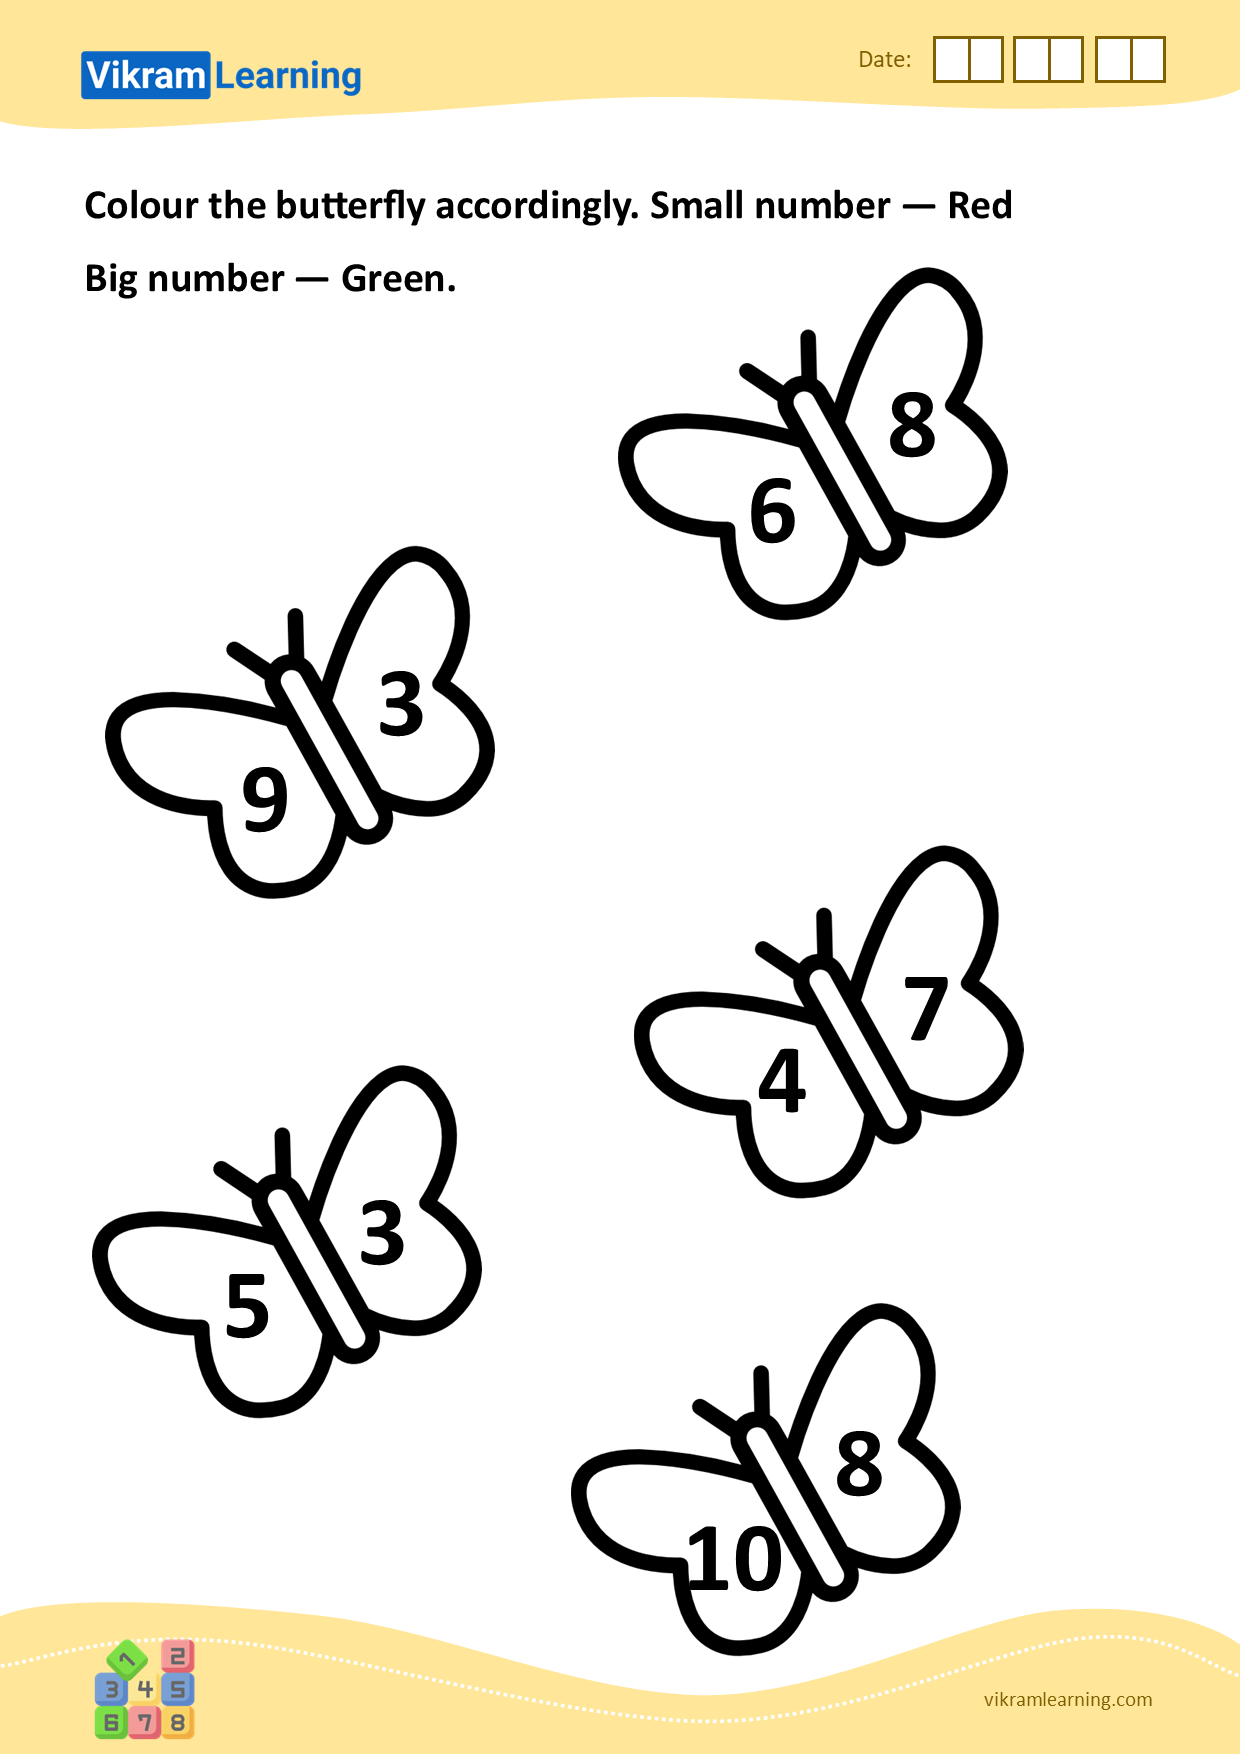 Download colour the butterfly accordingly. small number — red
big number — green. worksheets